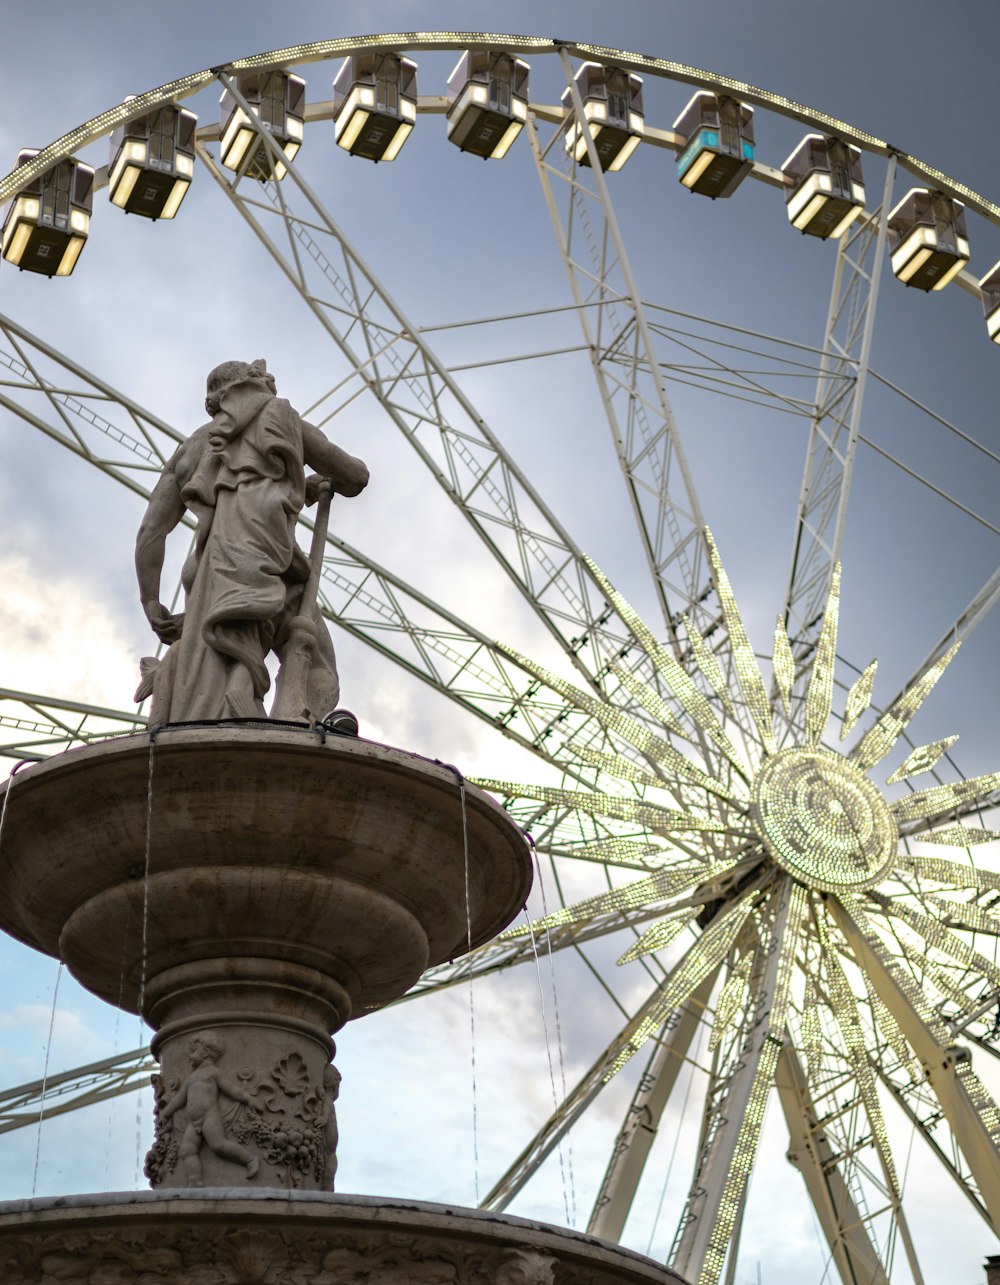 a statue of a person sitting on a fountain in front of a ferris wheel